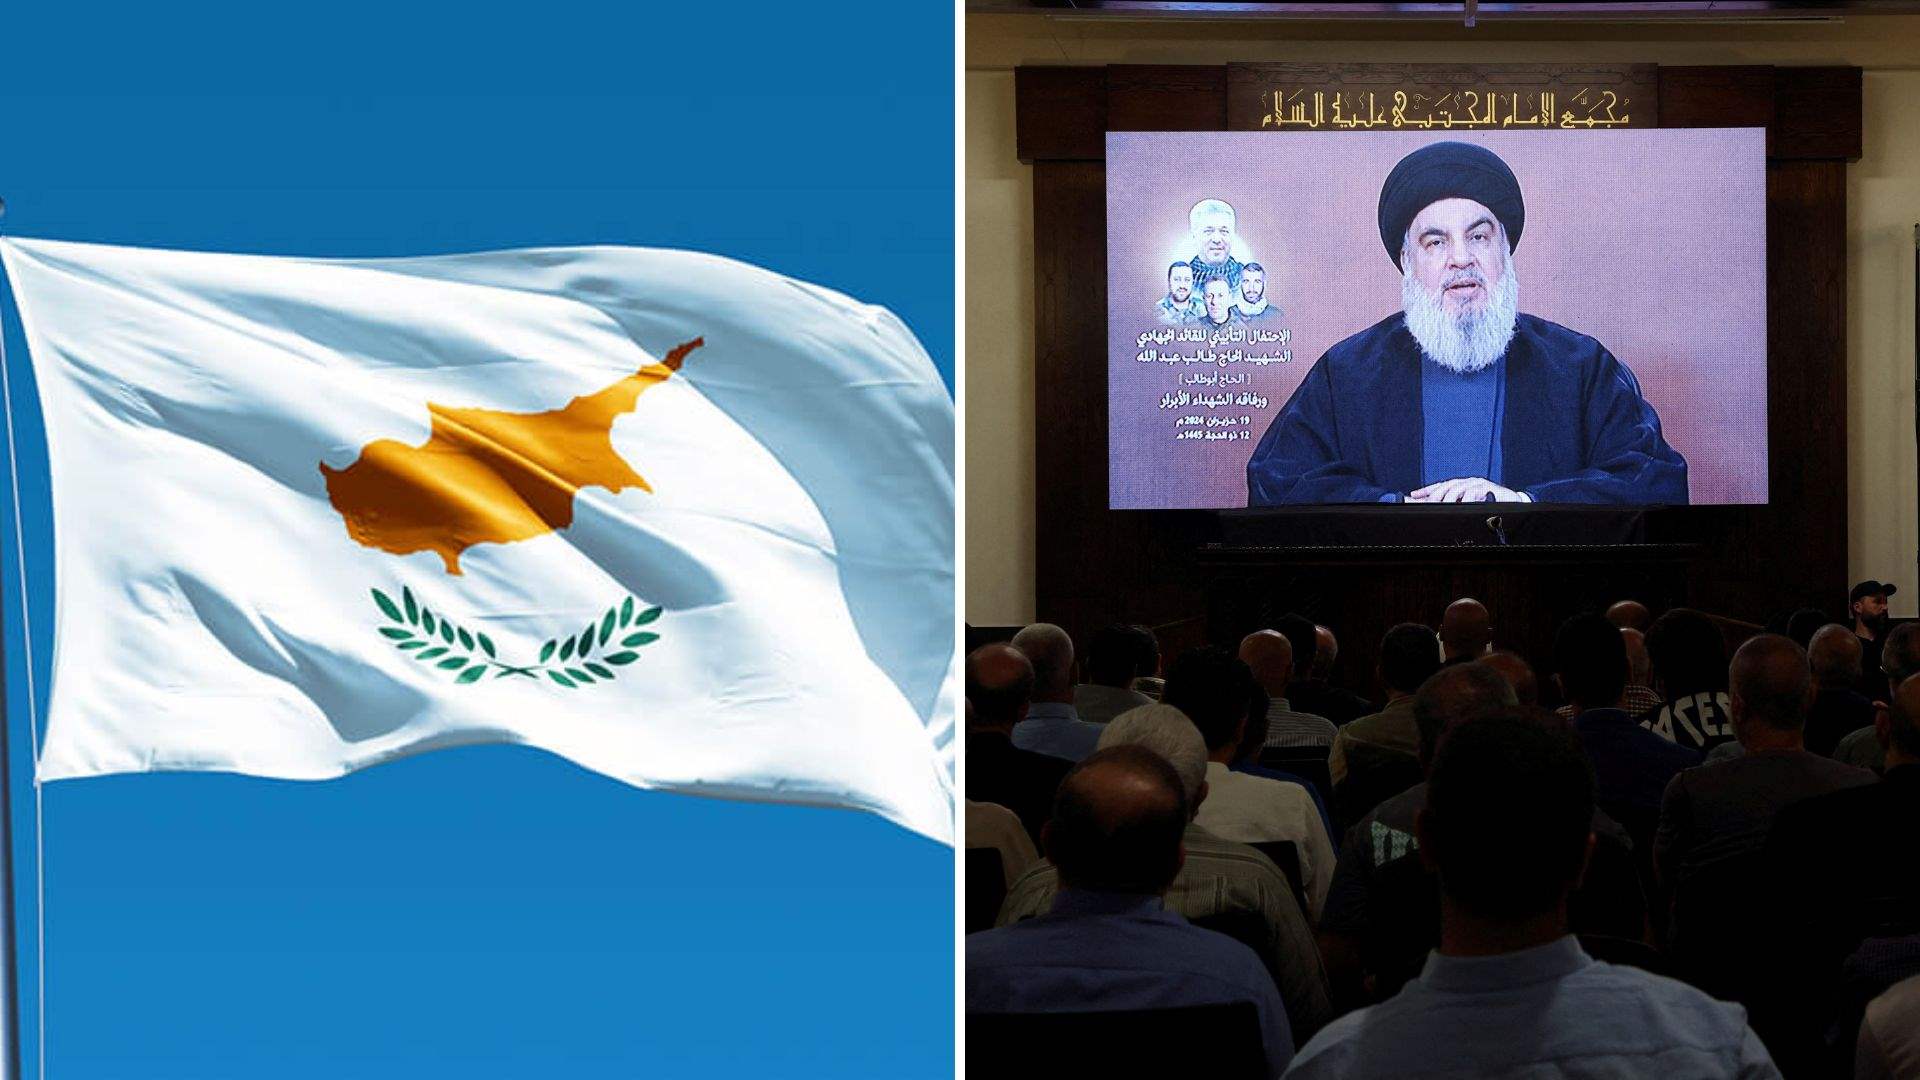 Cypriot President responds to Nasrallah: Cyprus is part of the solution, not the problem